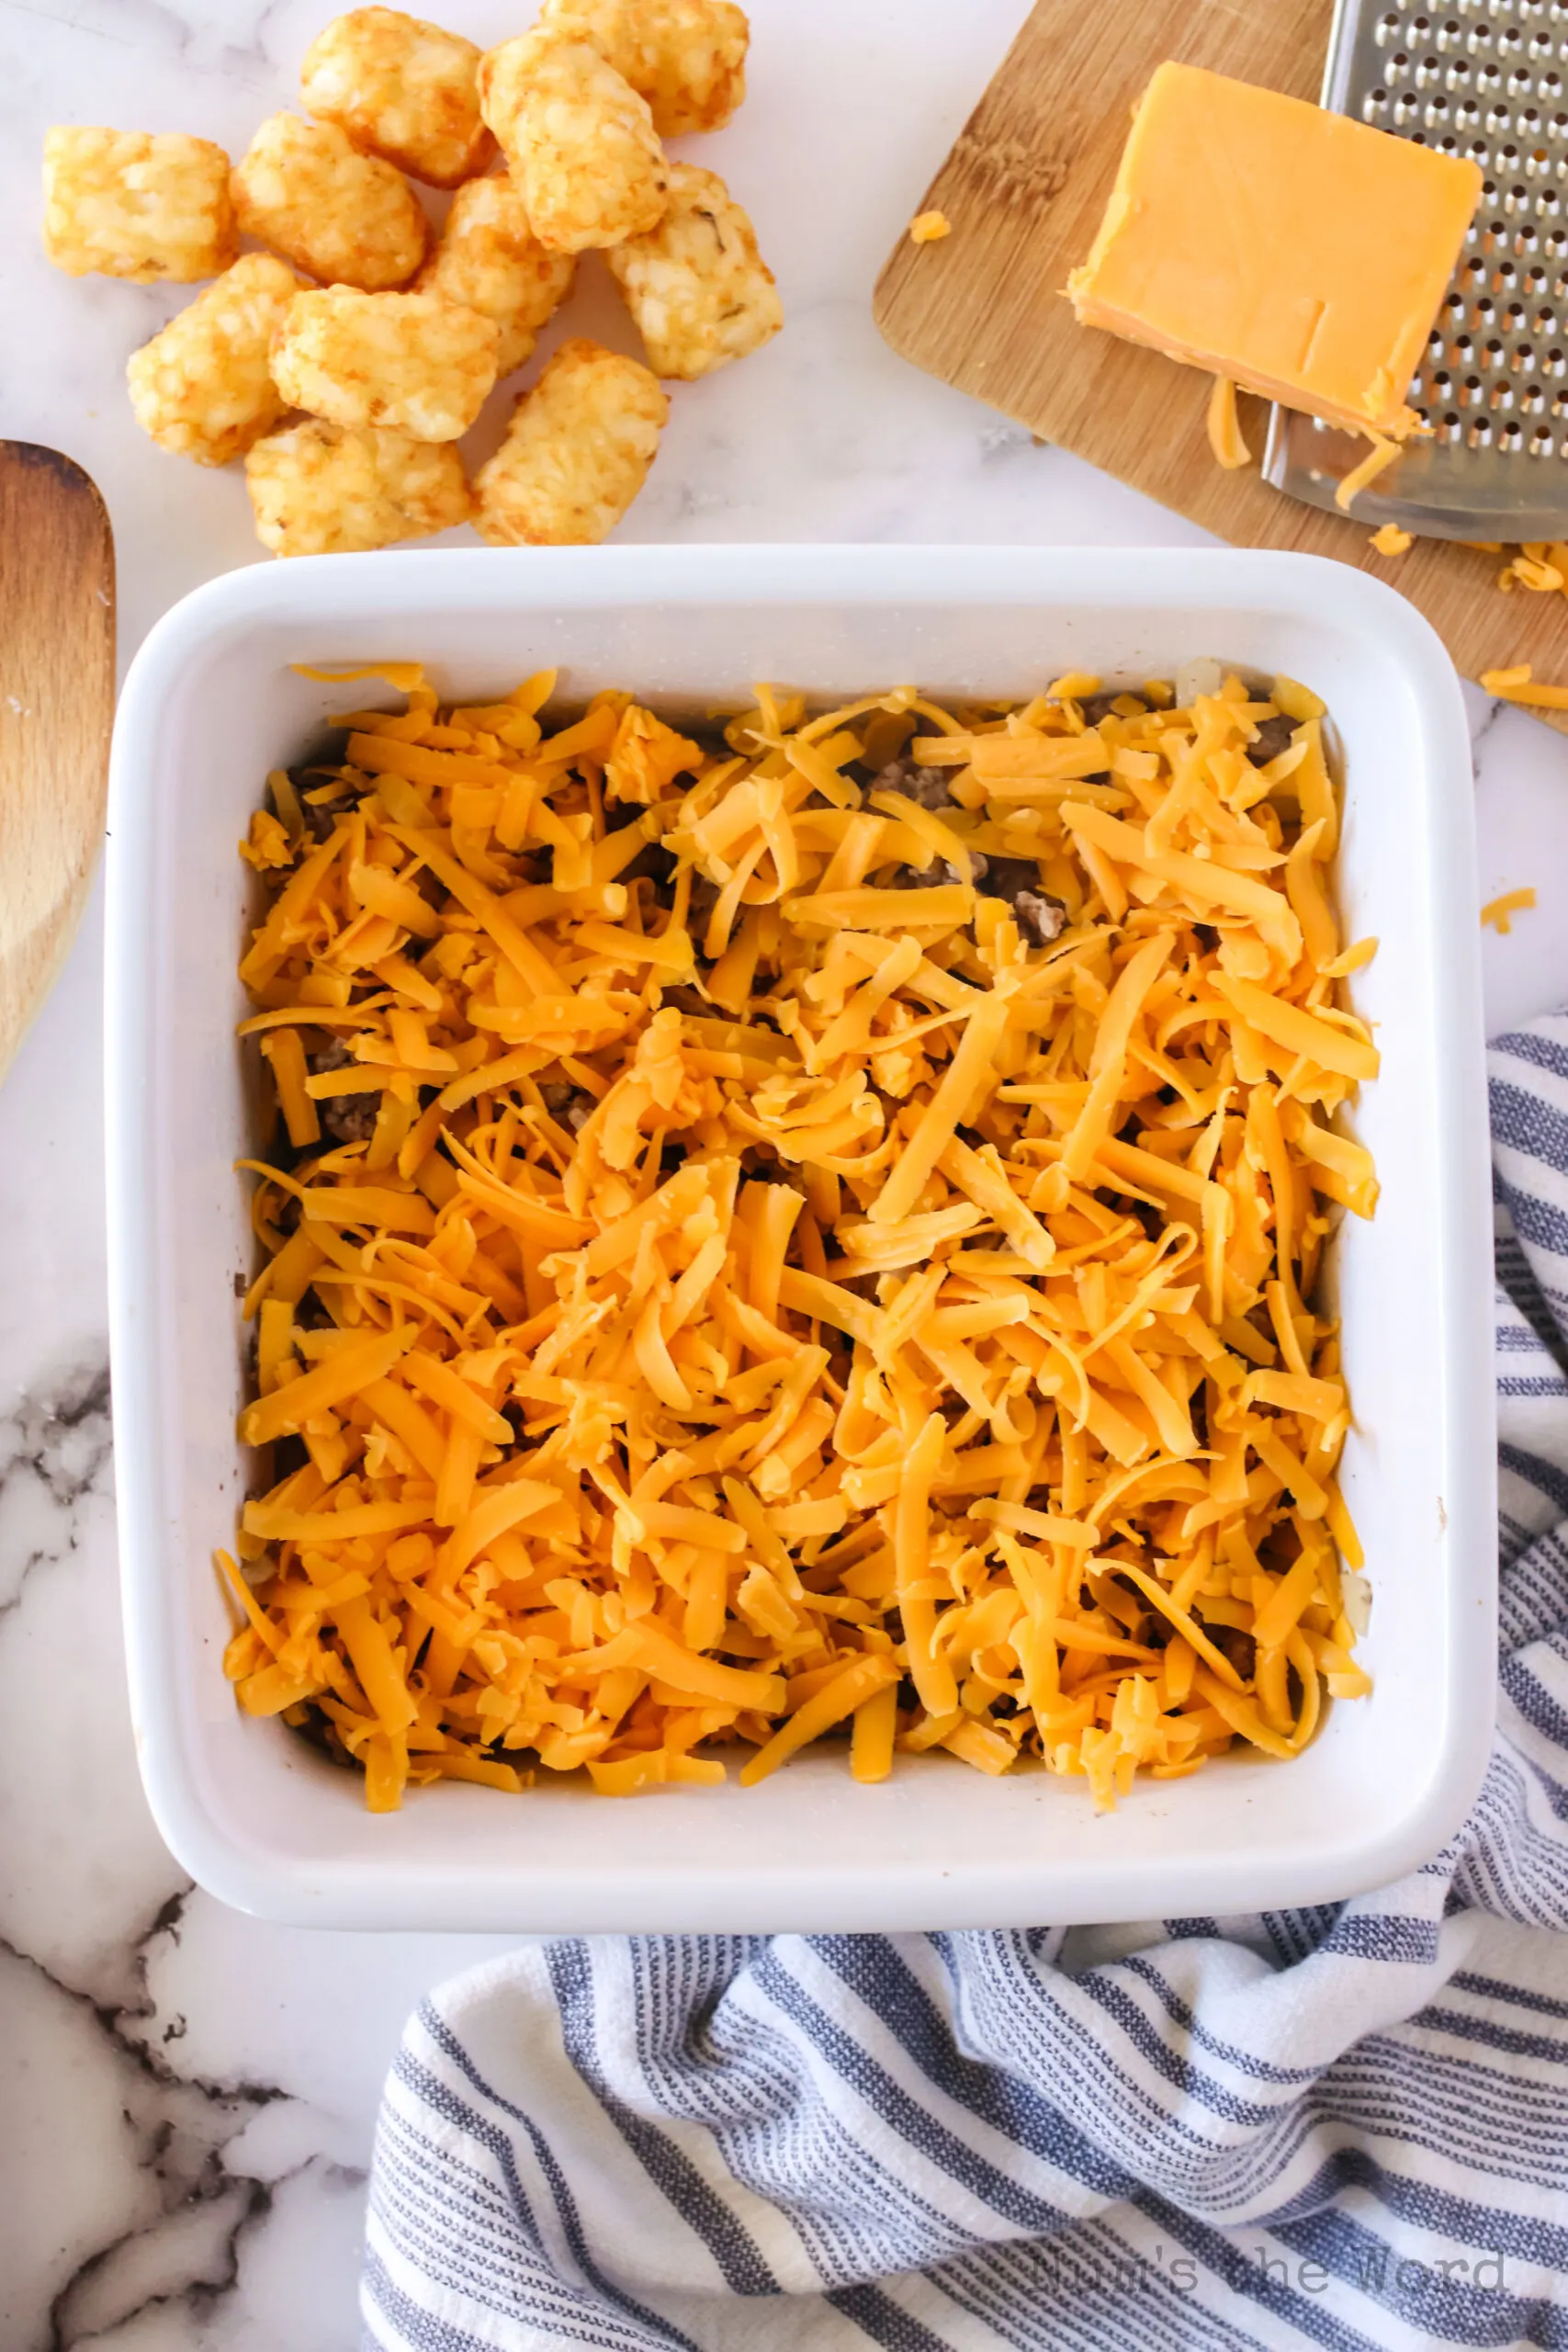 shredded cheddar cheese on top of ground beef mixture in casserole dish